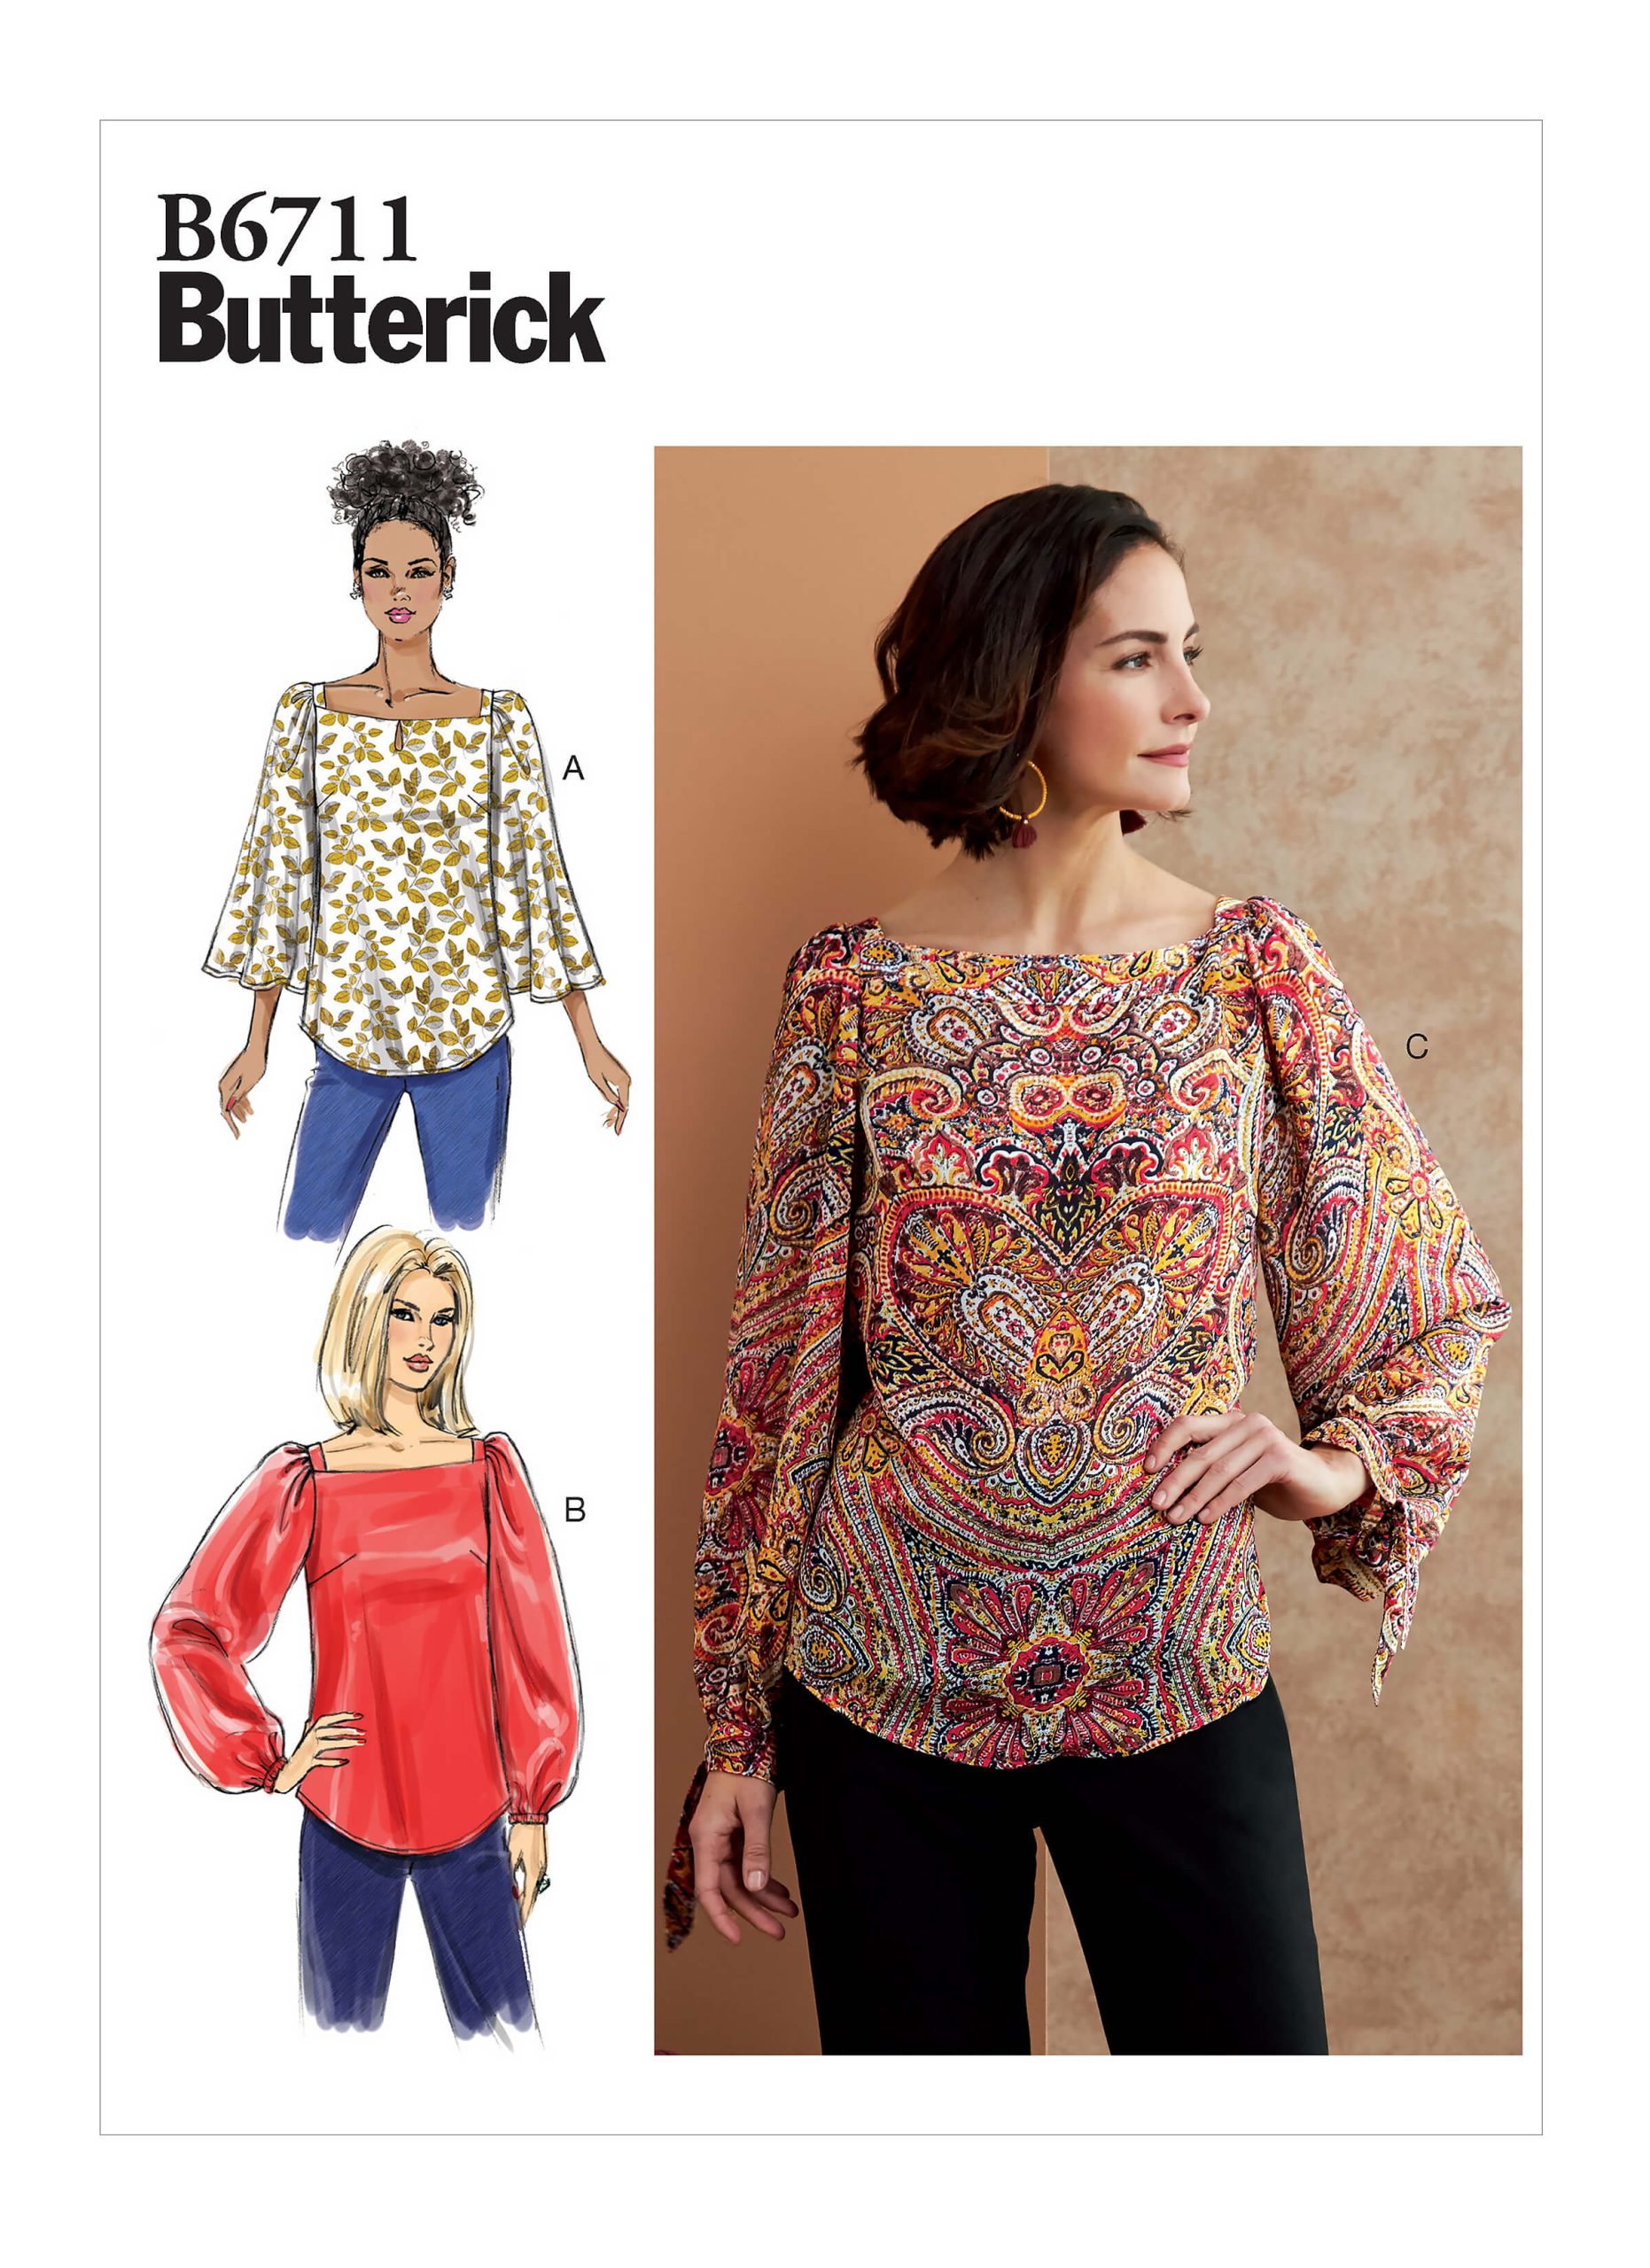 Butterick Sewing Pattern B6711 Misses' Top